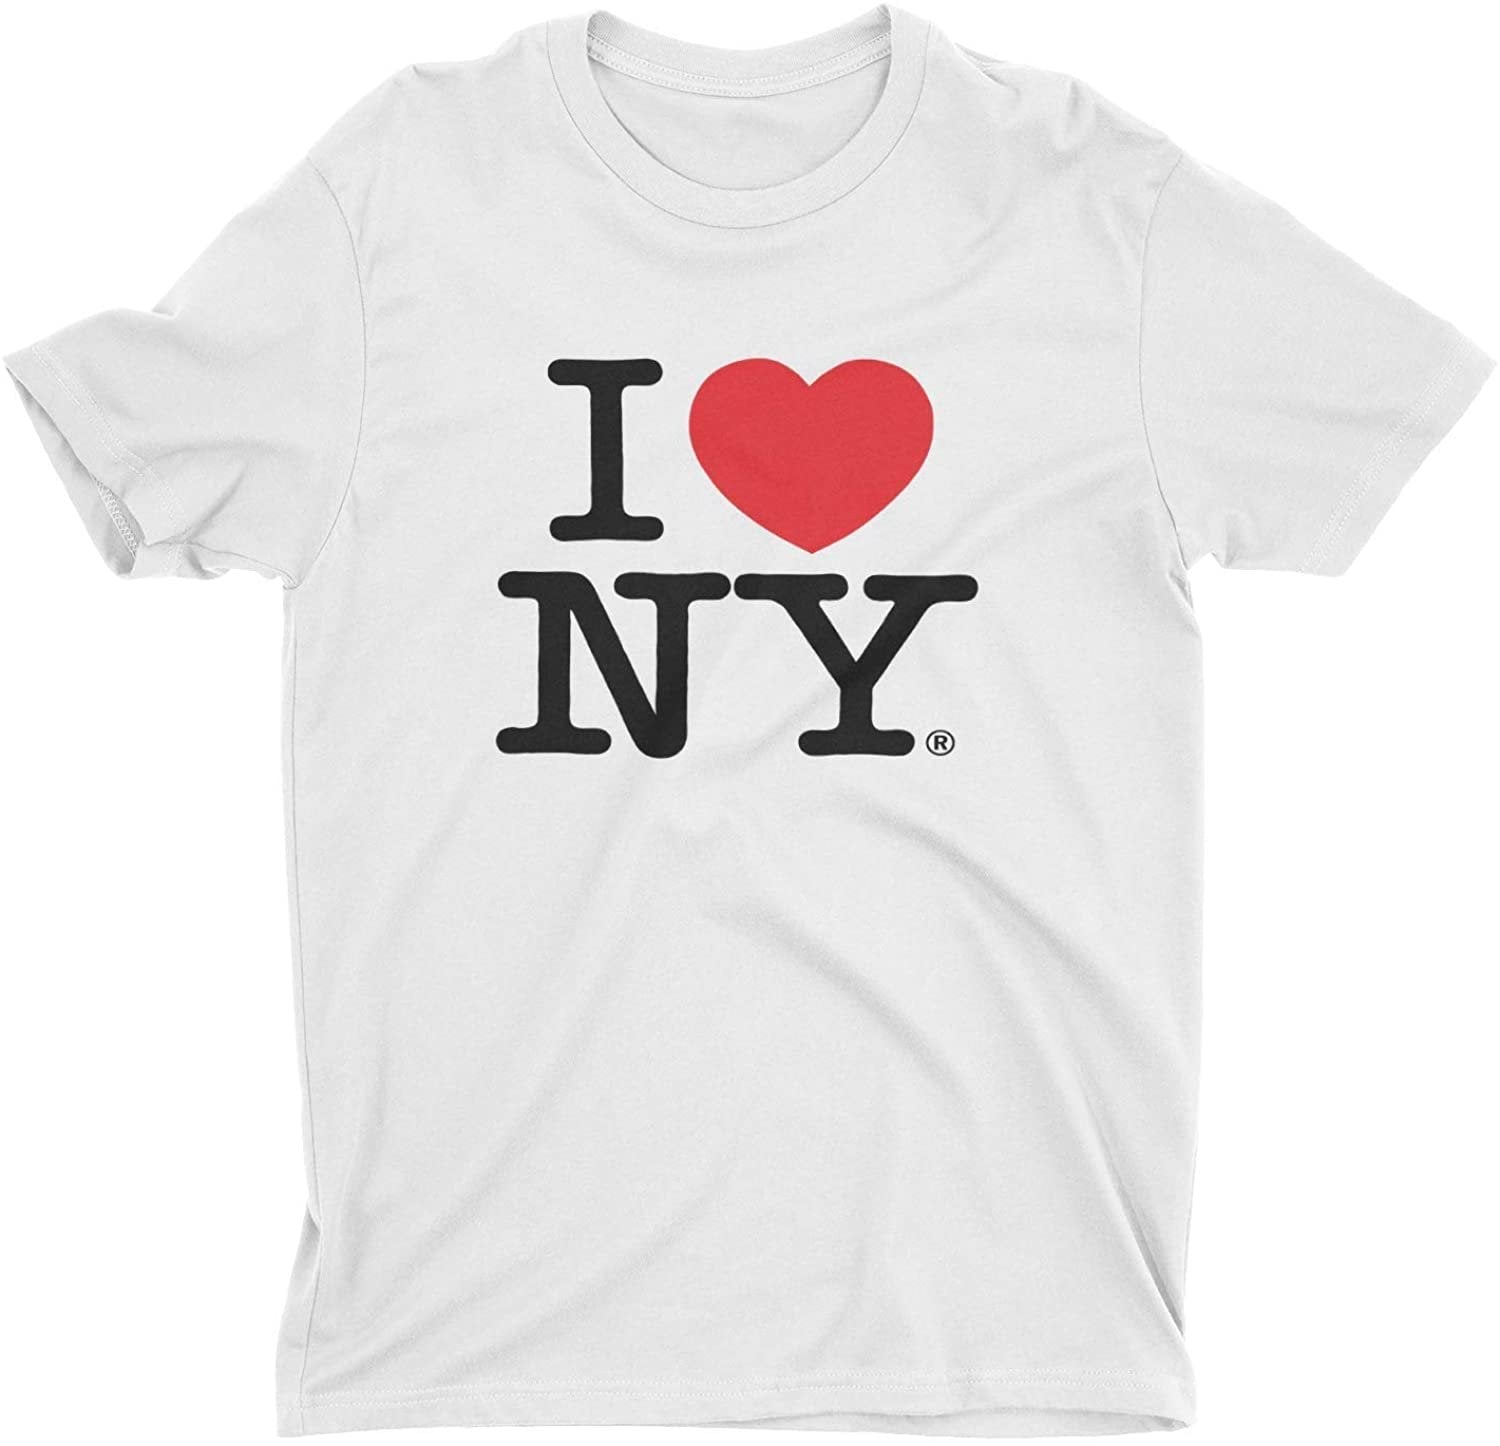 I Love NY Kids T-Shirt Officially Licensed Unisex Tees (Youth, White)